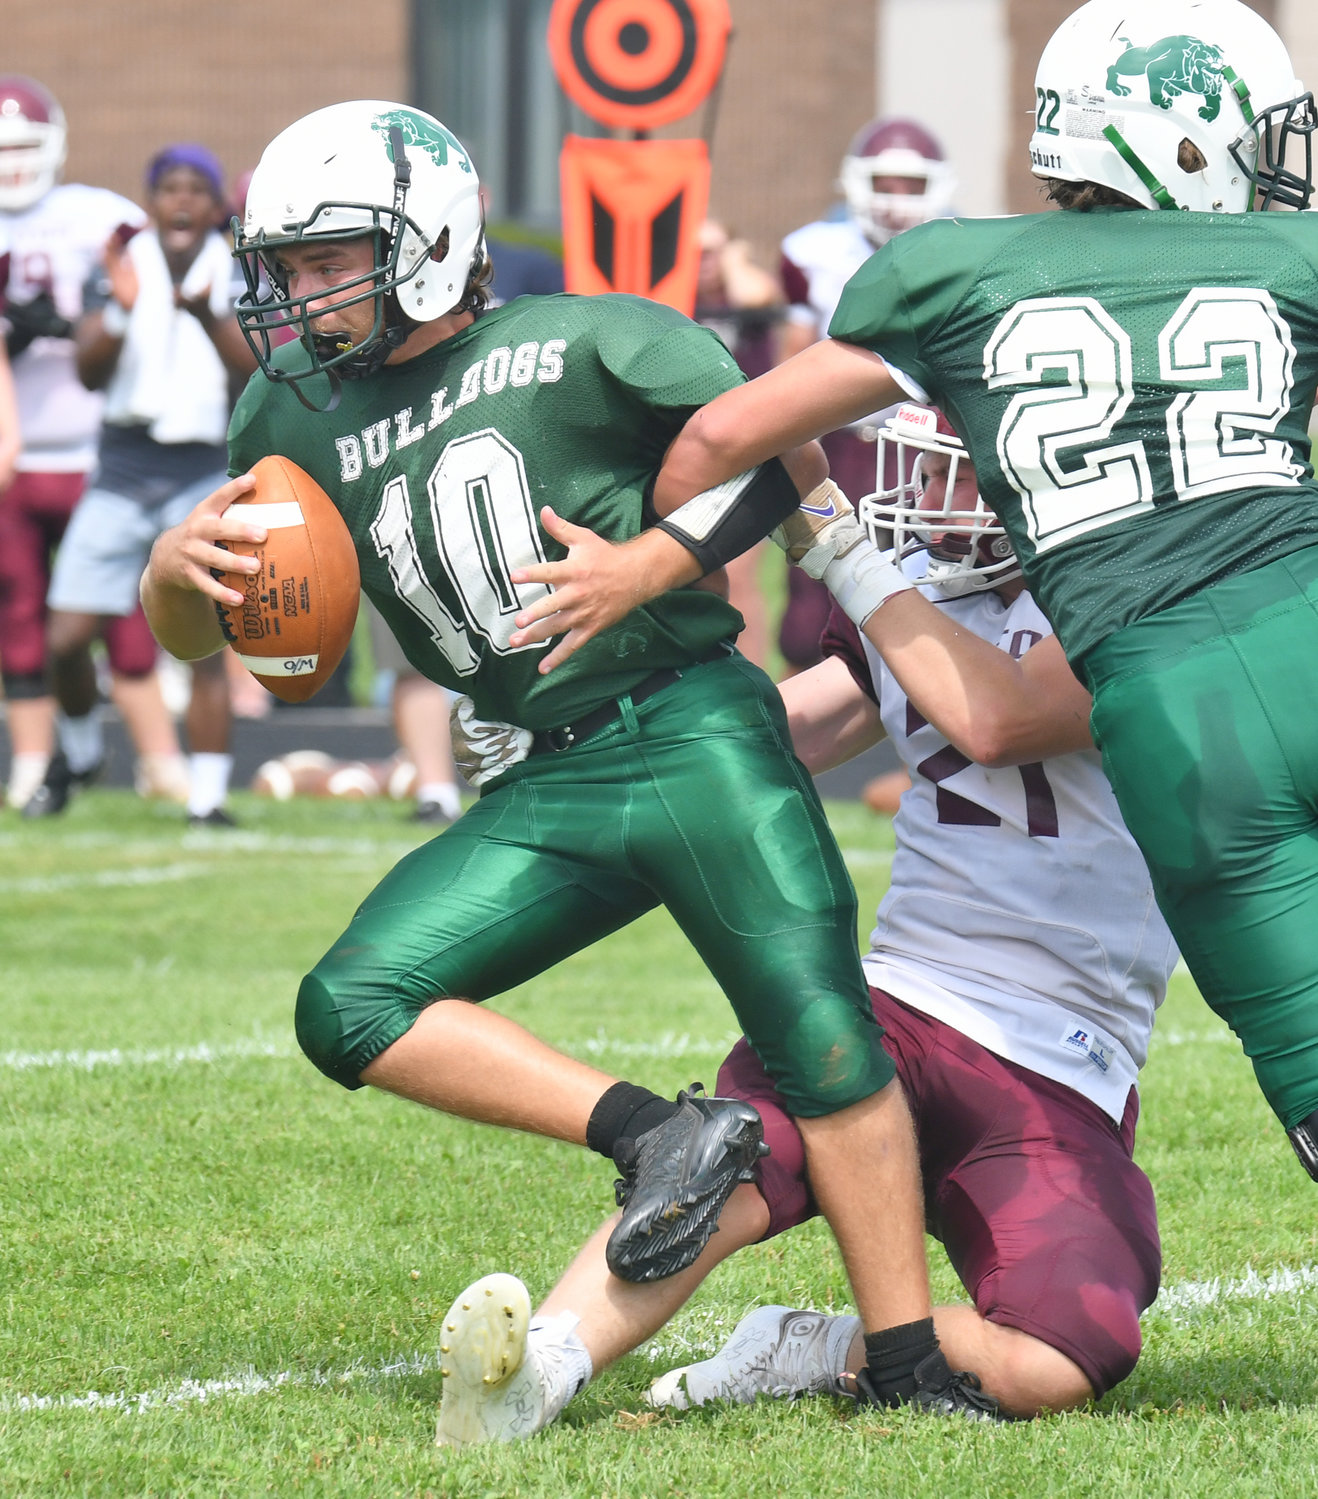 Westmoreland/Oriskany quarterback Michael Scalise is sacked in the second quarter by Clinton’s Aiden Wilcox during Saturday afternoon’s non-league game in Westmoreland. The Warriors won 28-6.